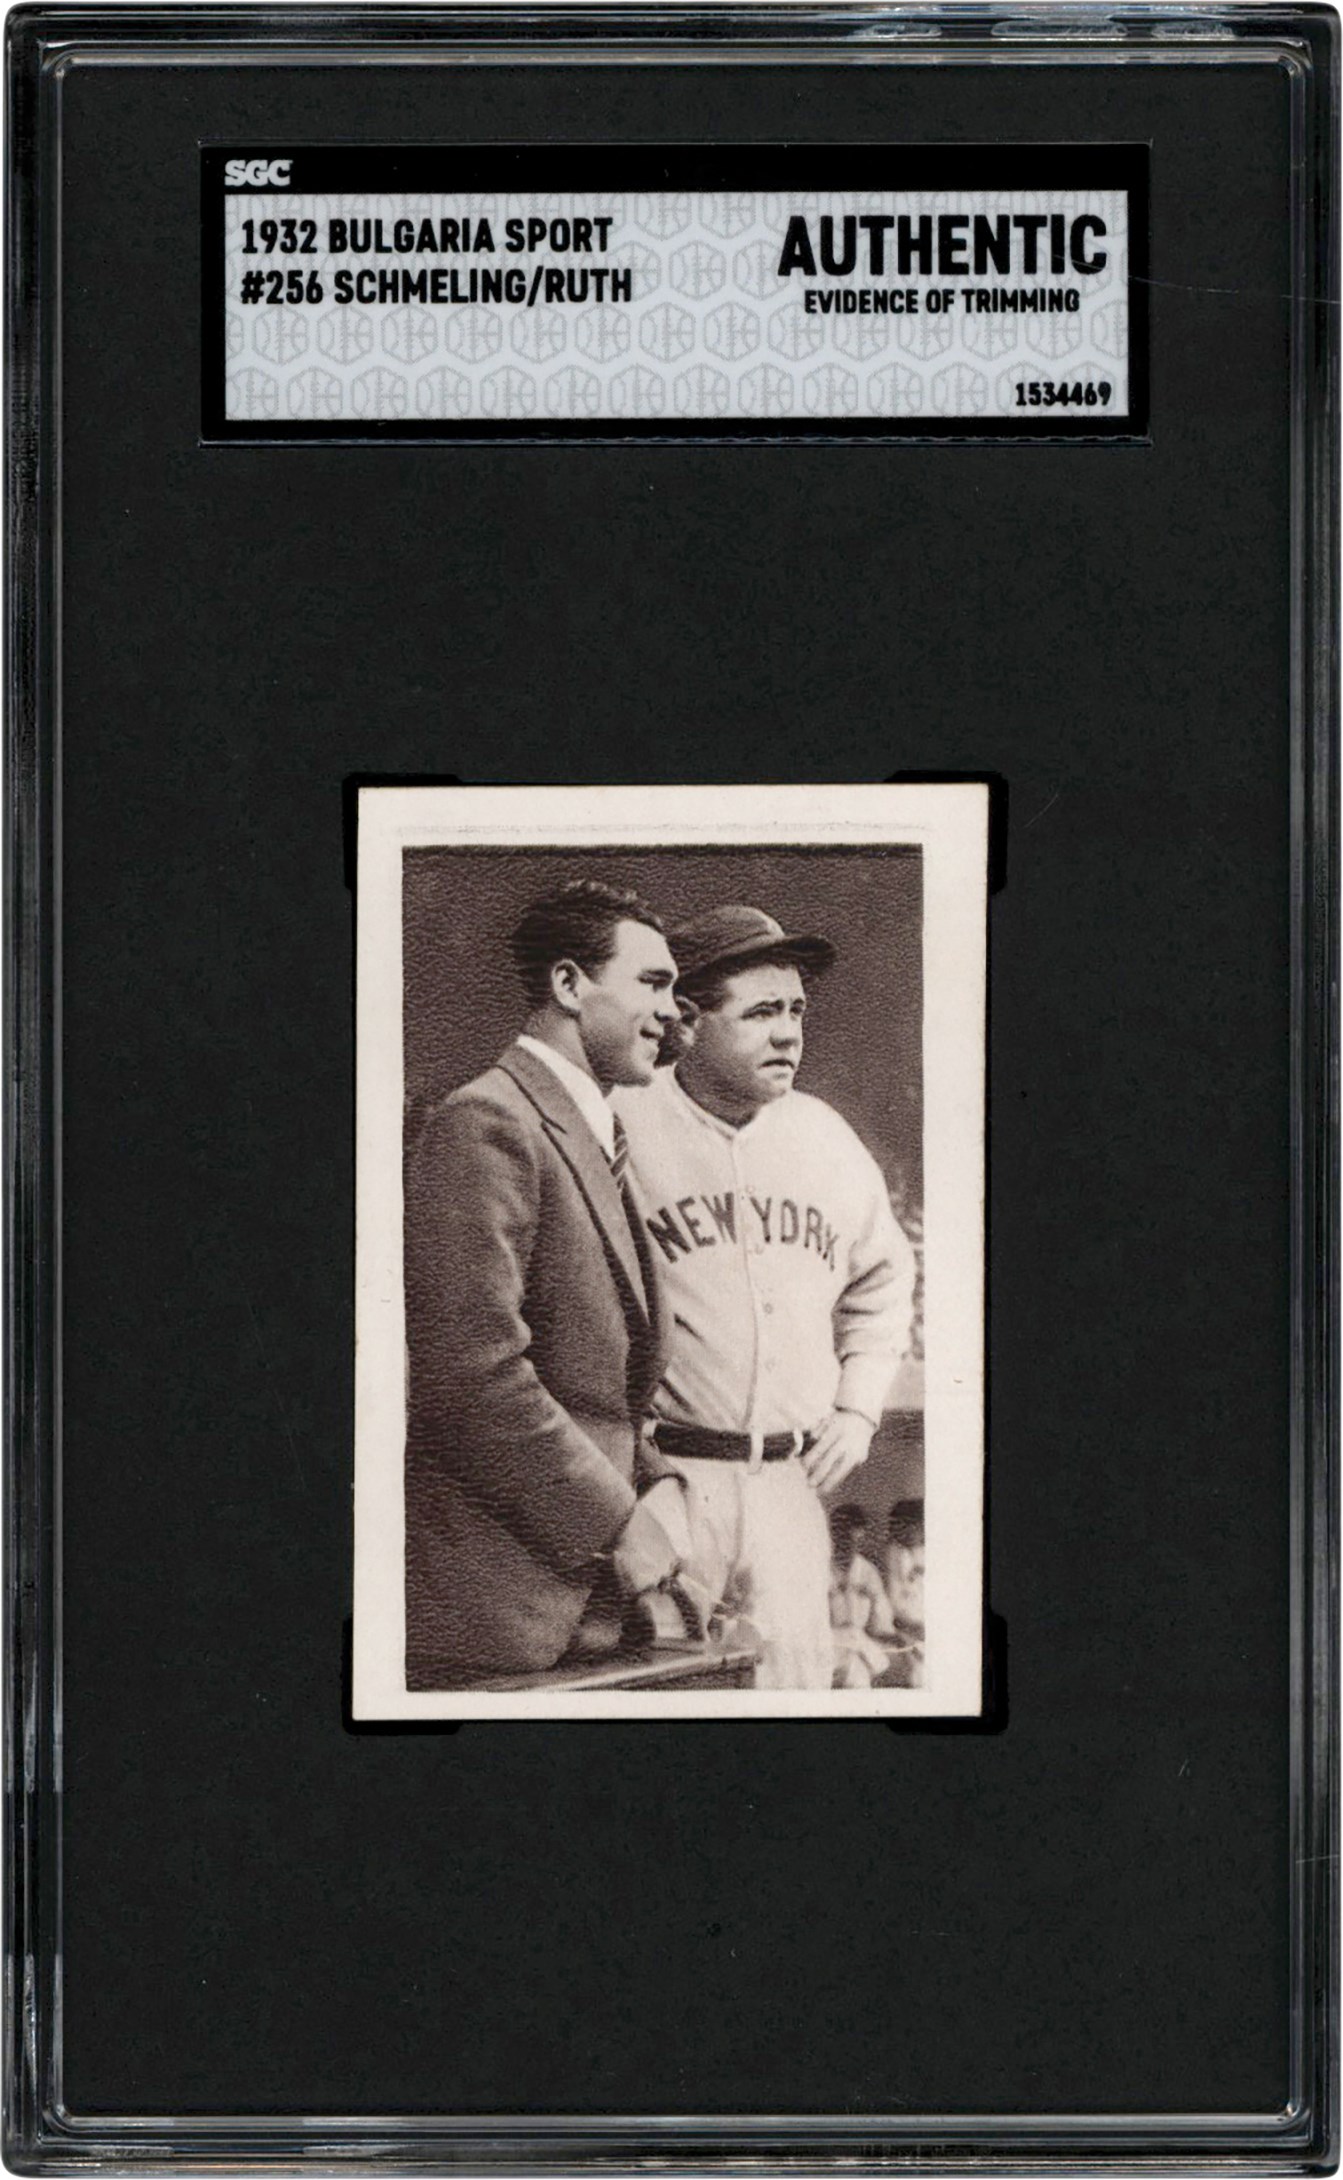 1932 Bulgaria Sport Photos #256 Babe Ruth and Max Schmeling SGC Authentic